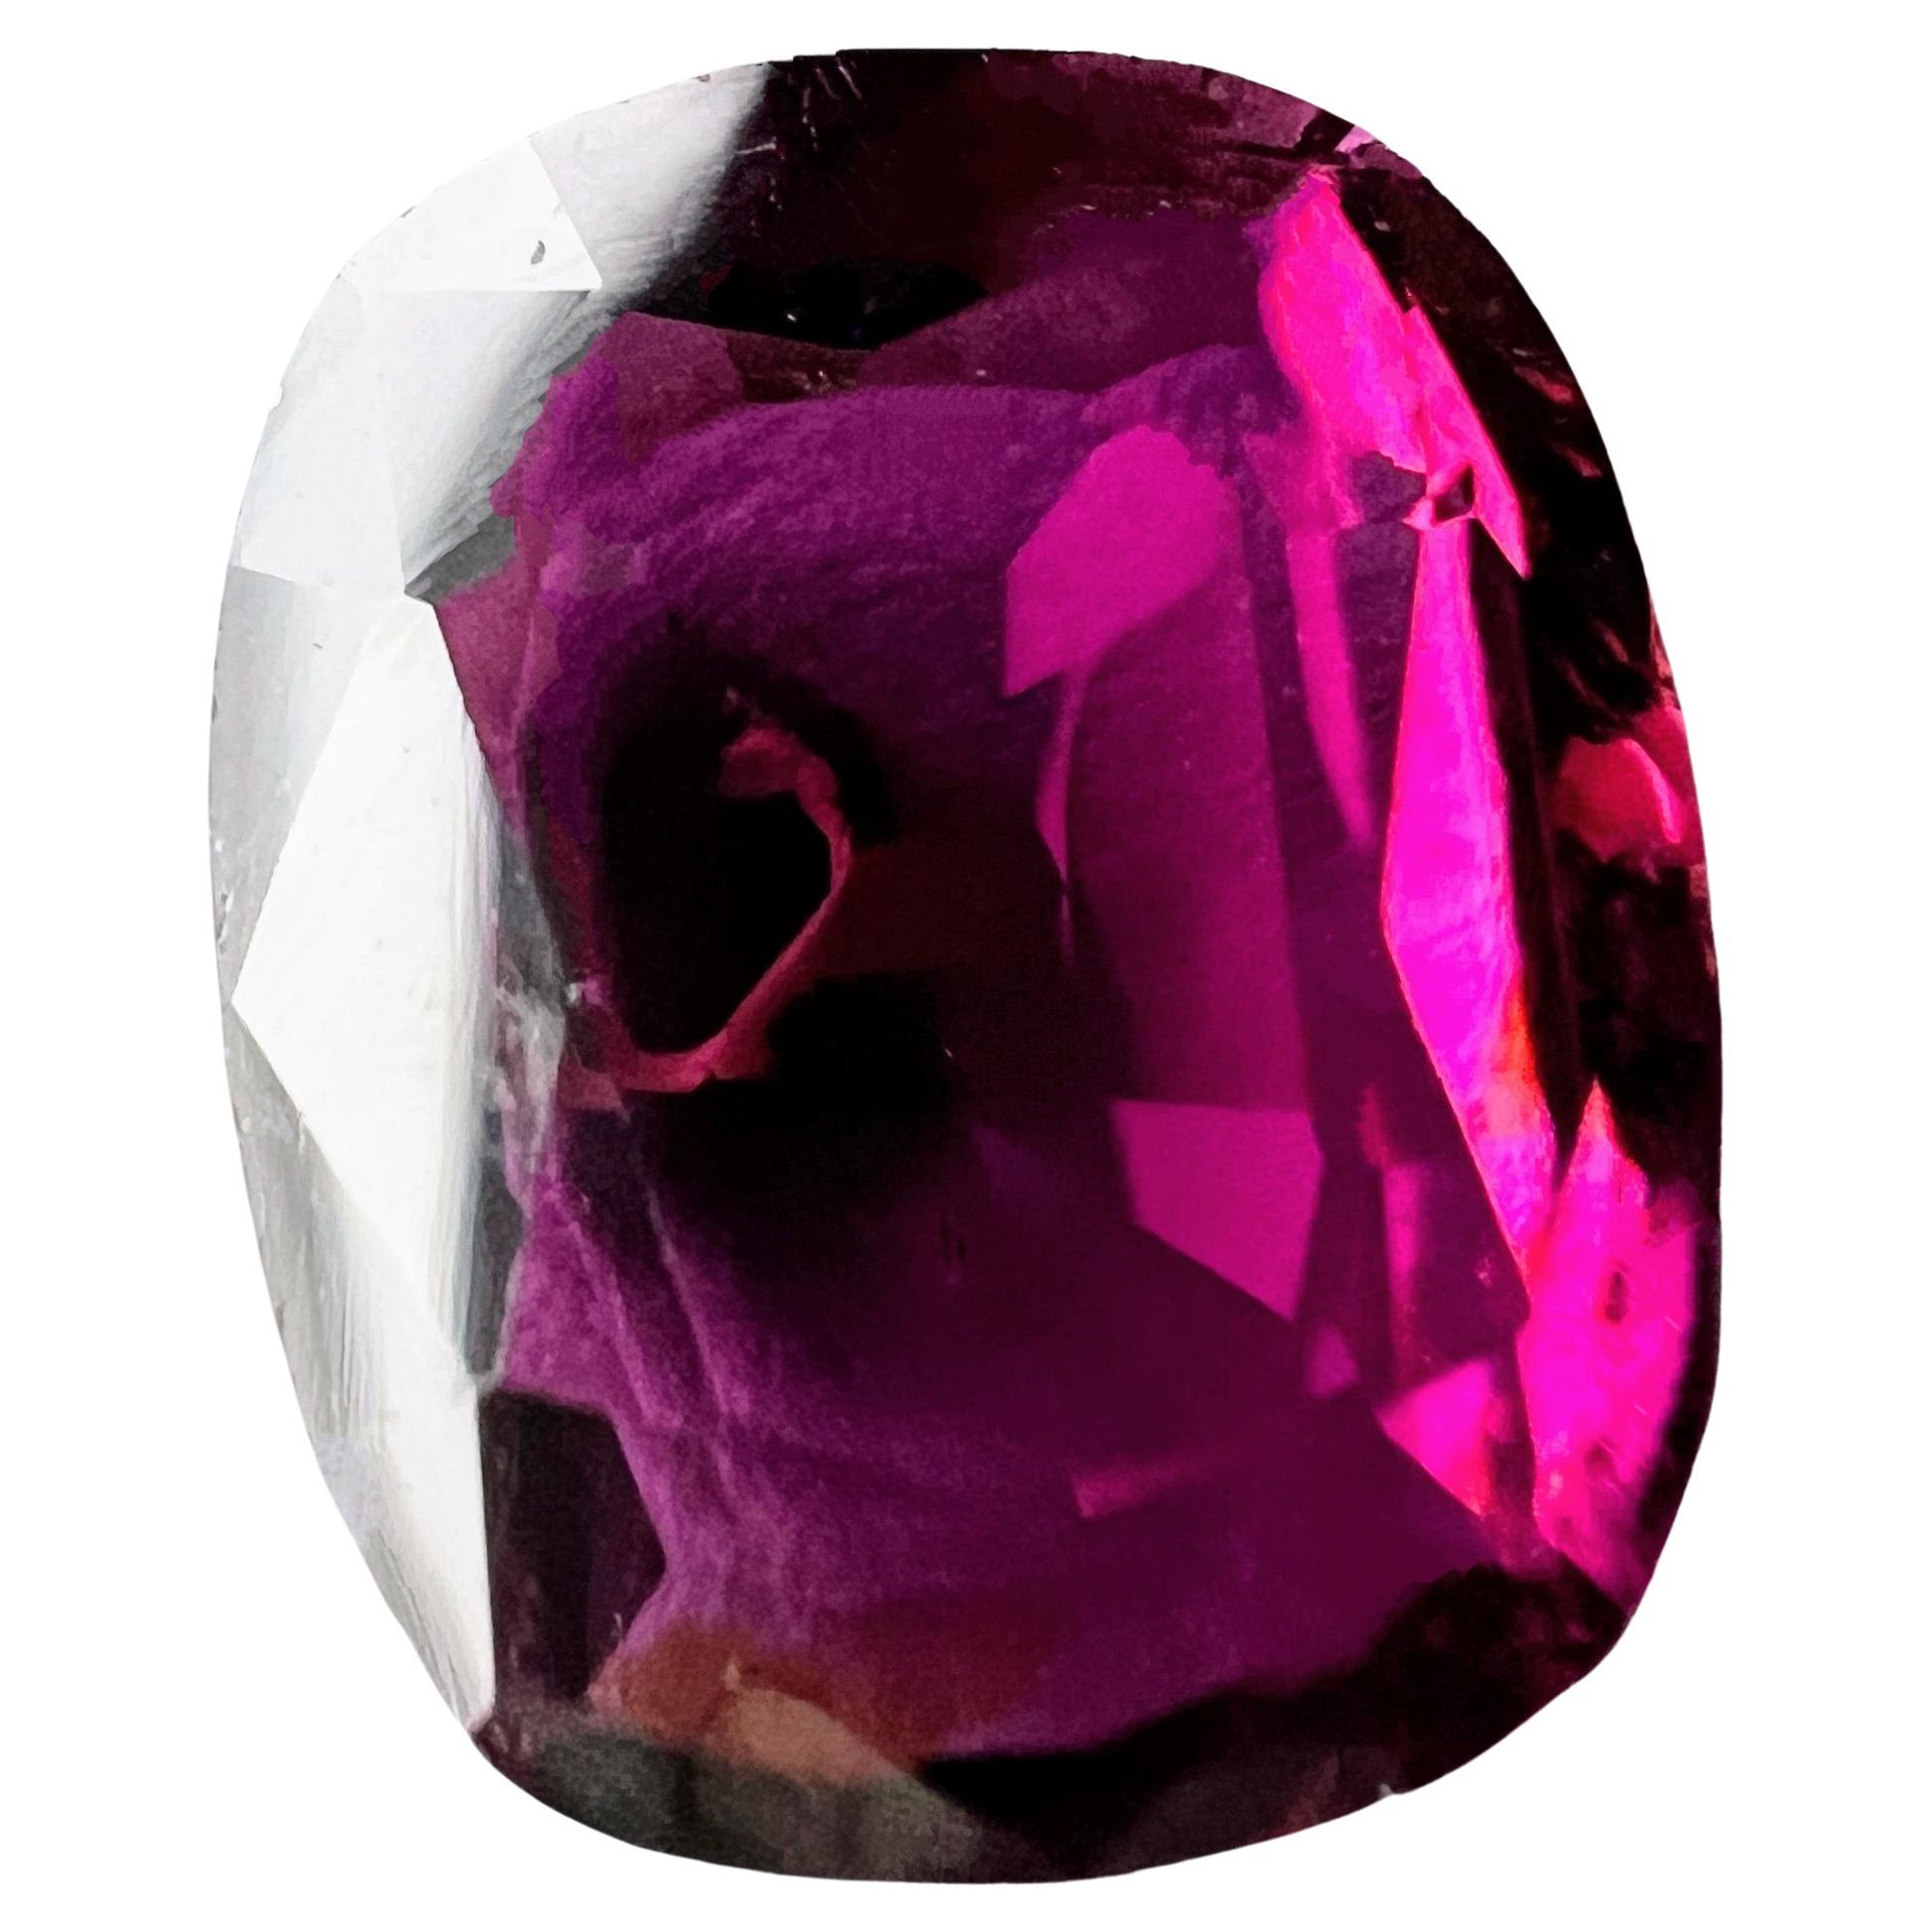 Unleash your creativity with the enchanting beauty of our 4.03-carat Cushion Cut Pinkish Red Rubellite Tourmaline Loose Gemstone. 

Gemstone Details:
Carat Weight: 4.03 carats
Shape: Cushion Cut
Variety: Pinkish Red Rubellite